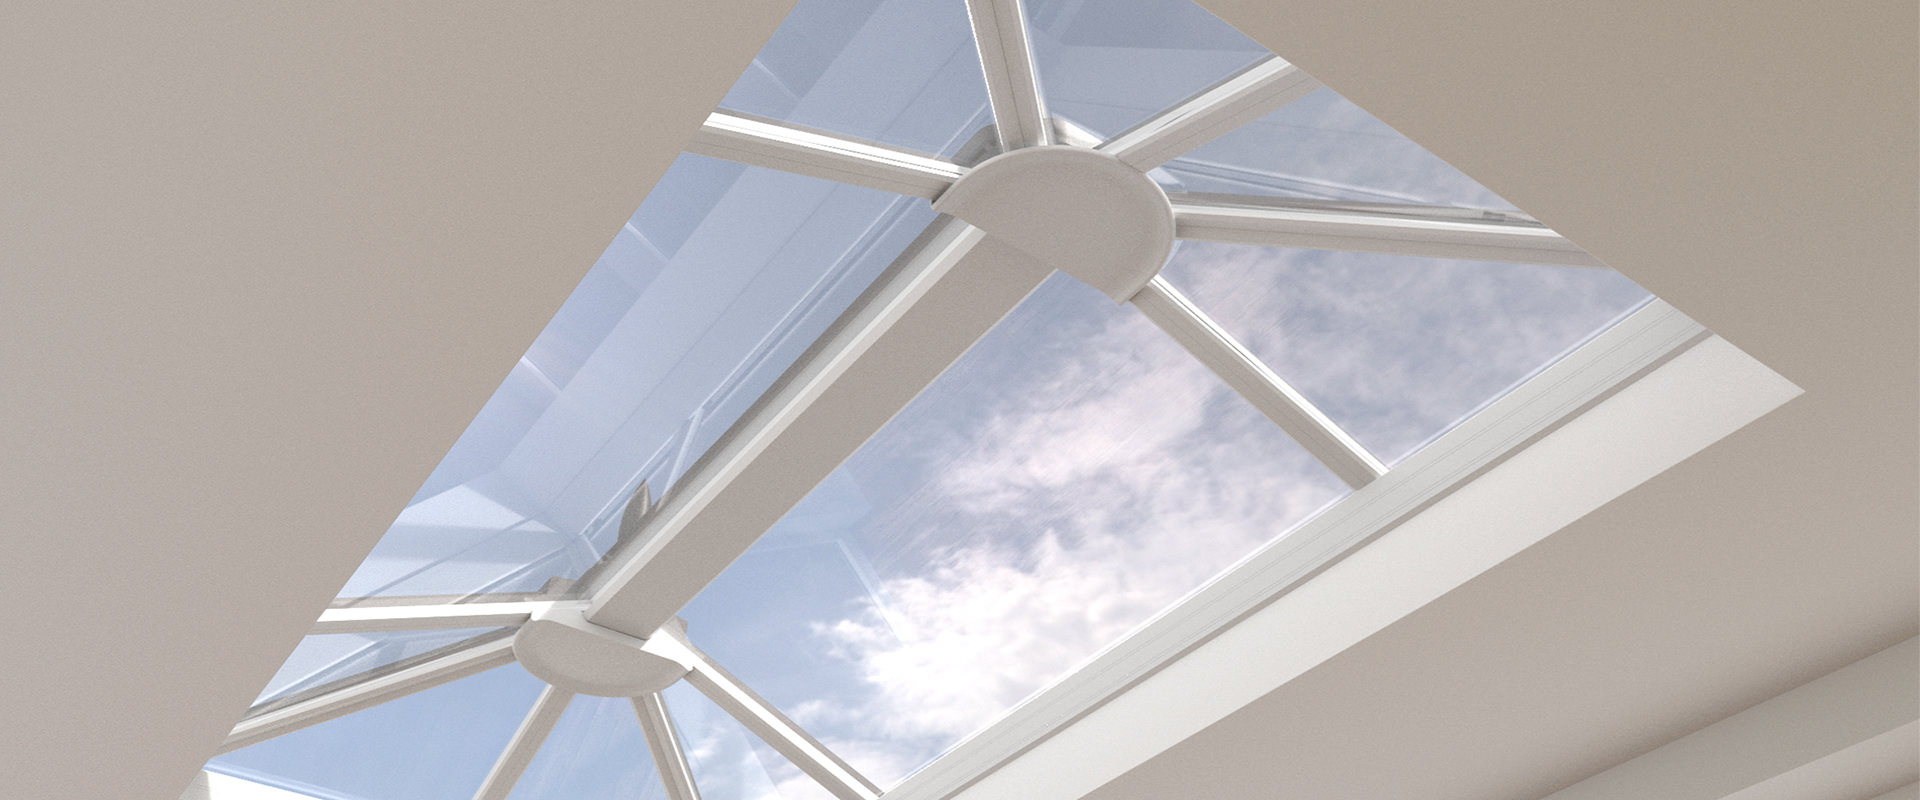 Conservatory Roofs Buckinghamshire